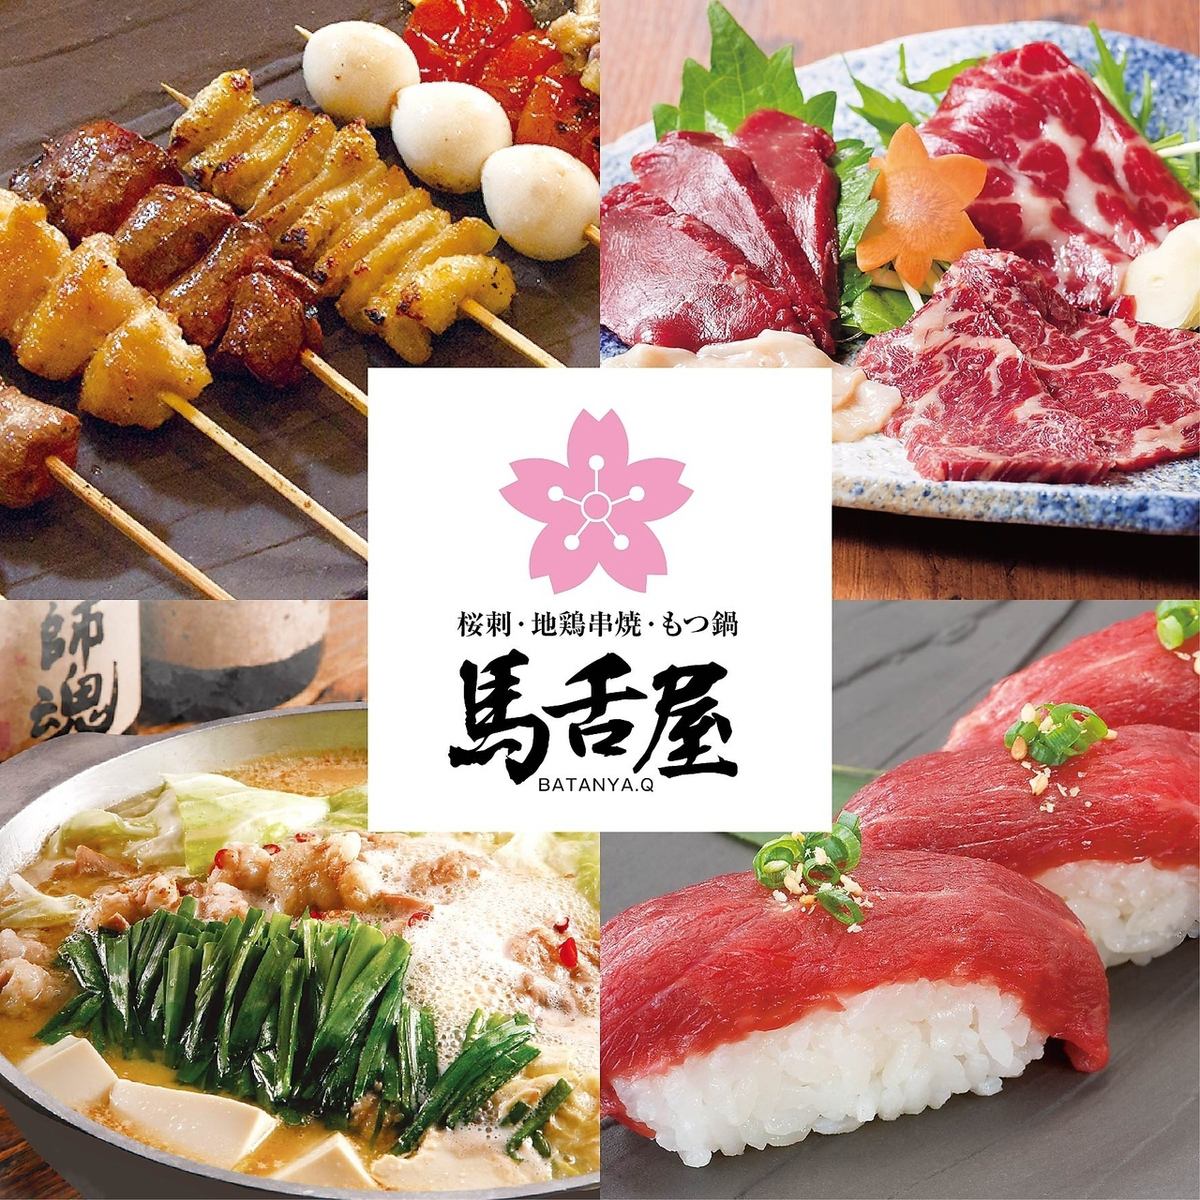 Large and small private rooms available Horse sashimi Beef offal hotpot Local chicken skewers